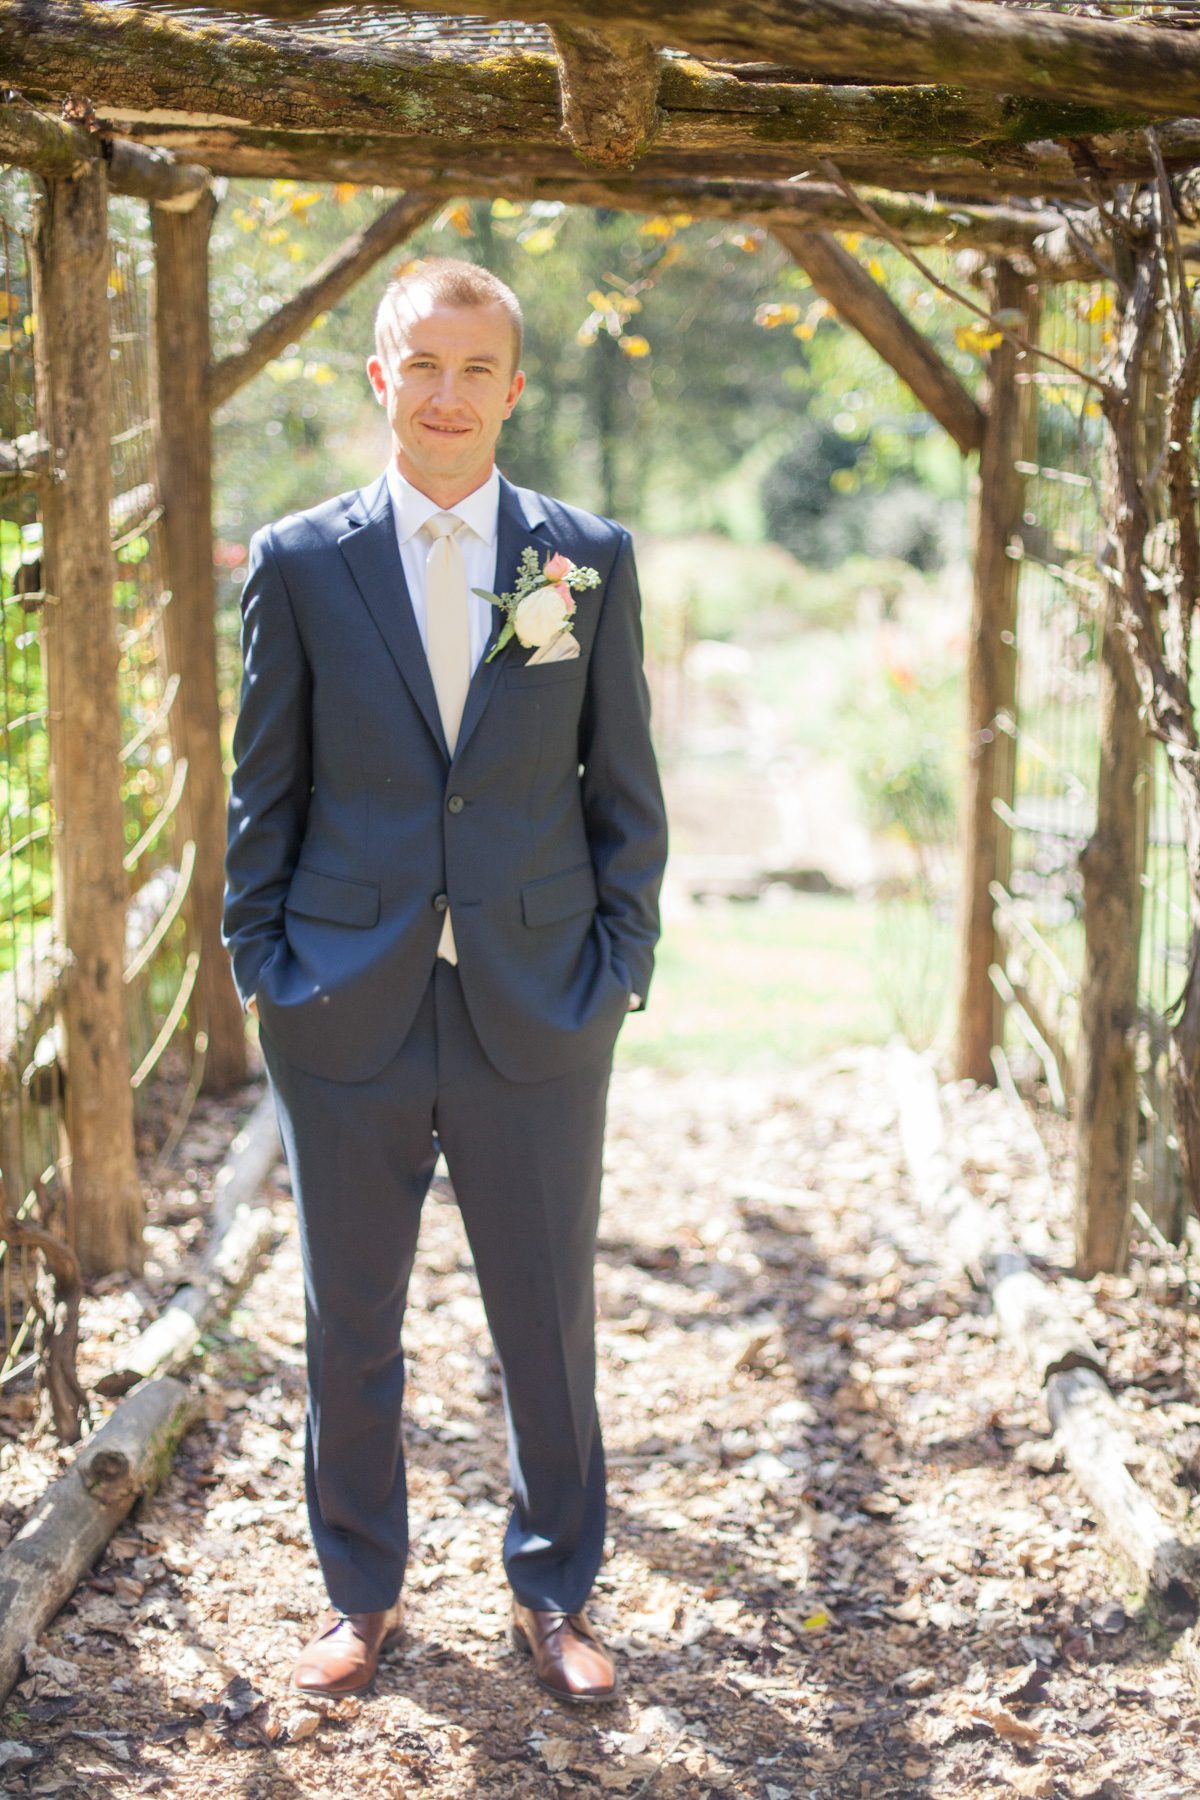 Groom at Butterfly Hollow wedding in Gordonsville, TN / Photography by Krista Lee